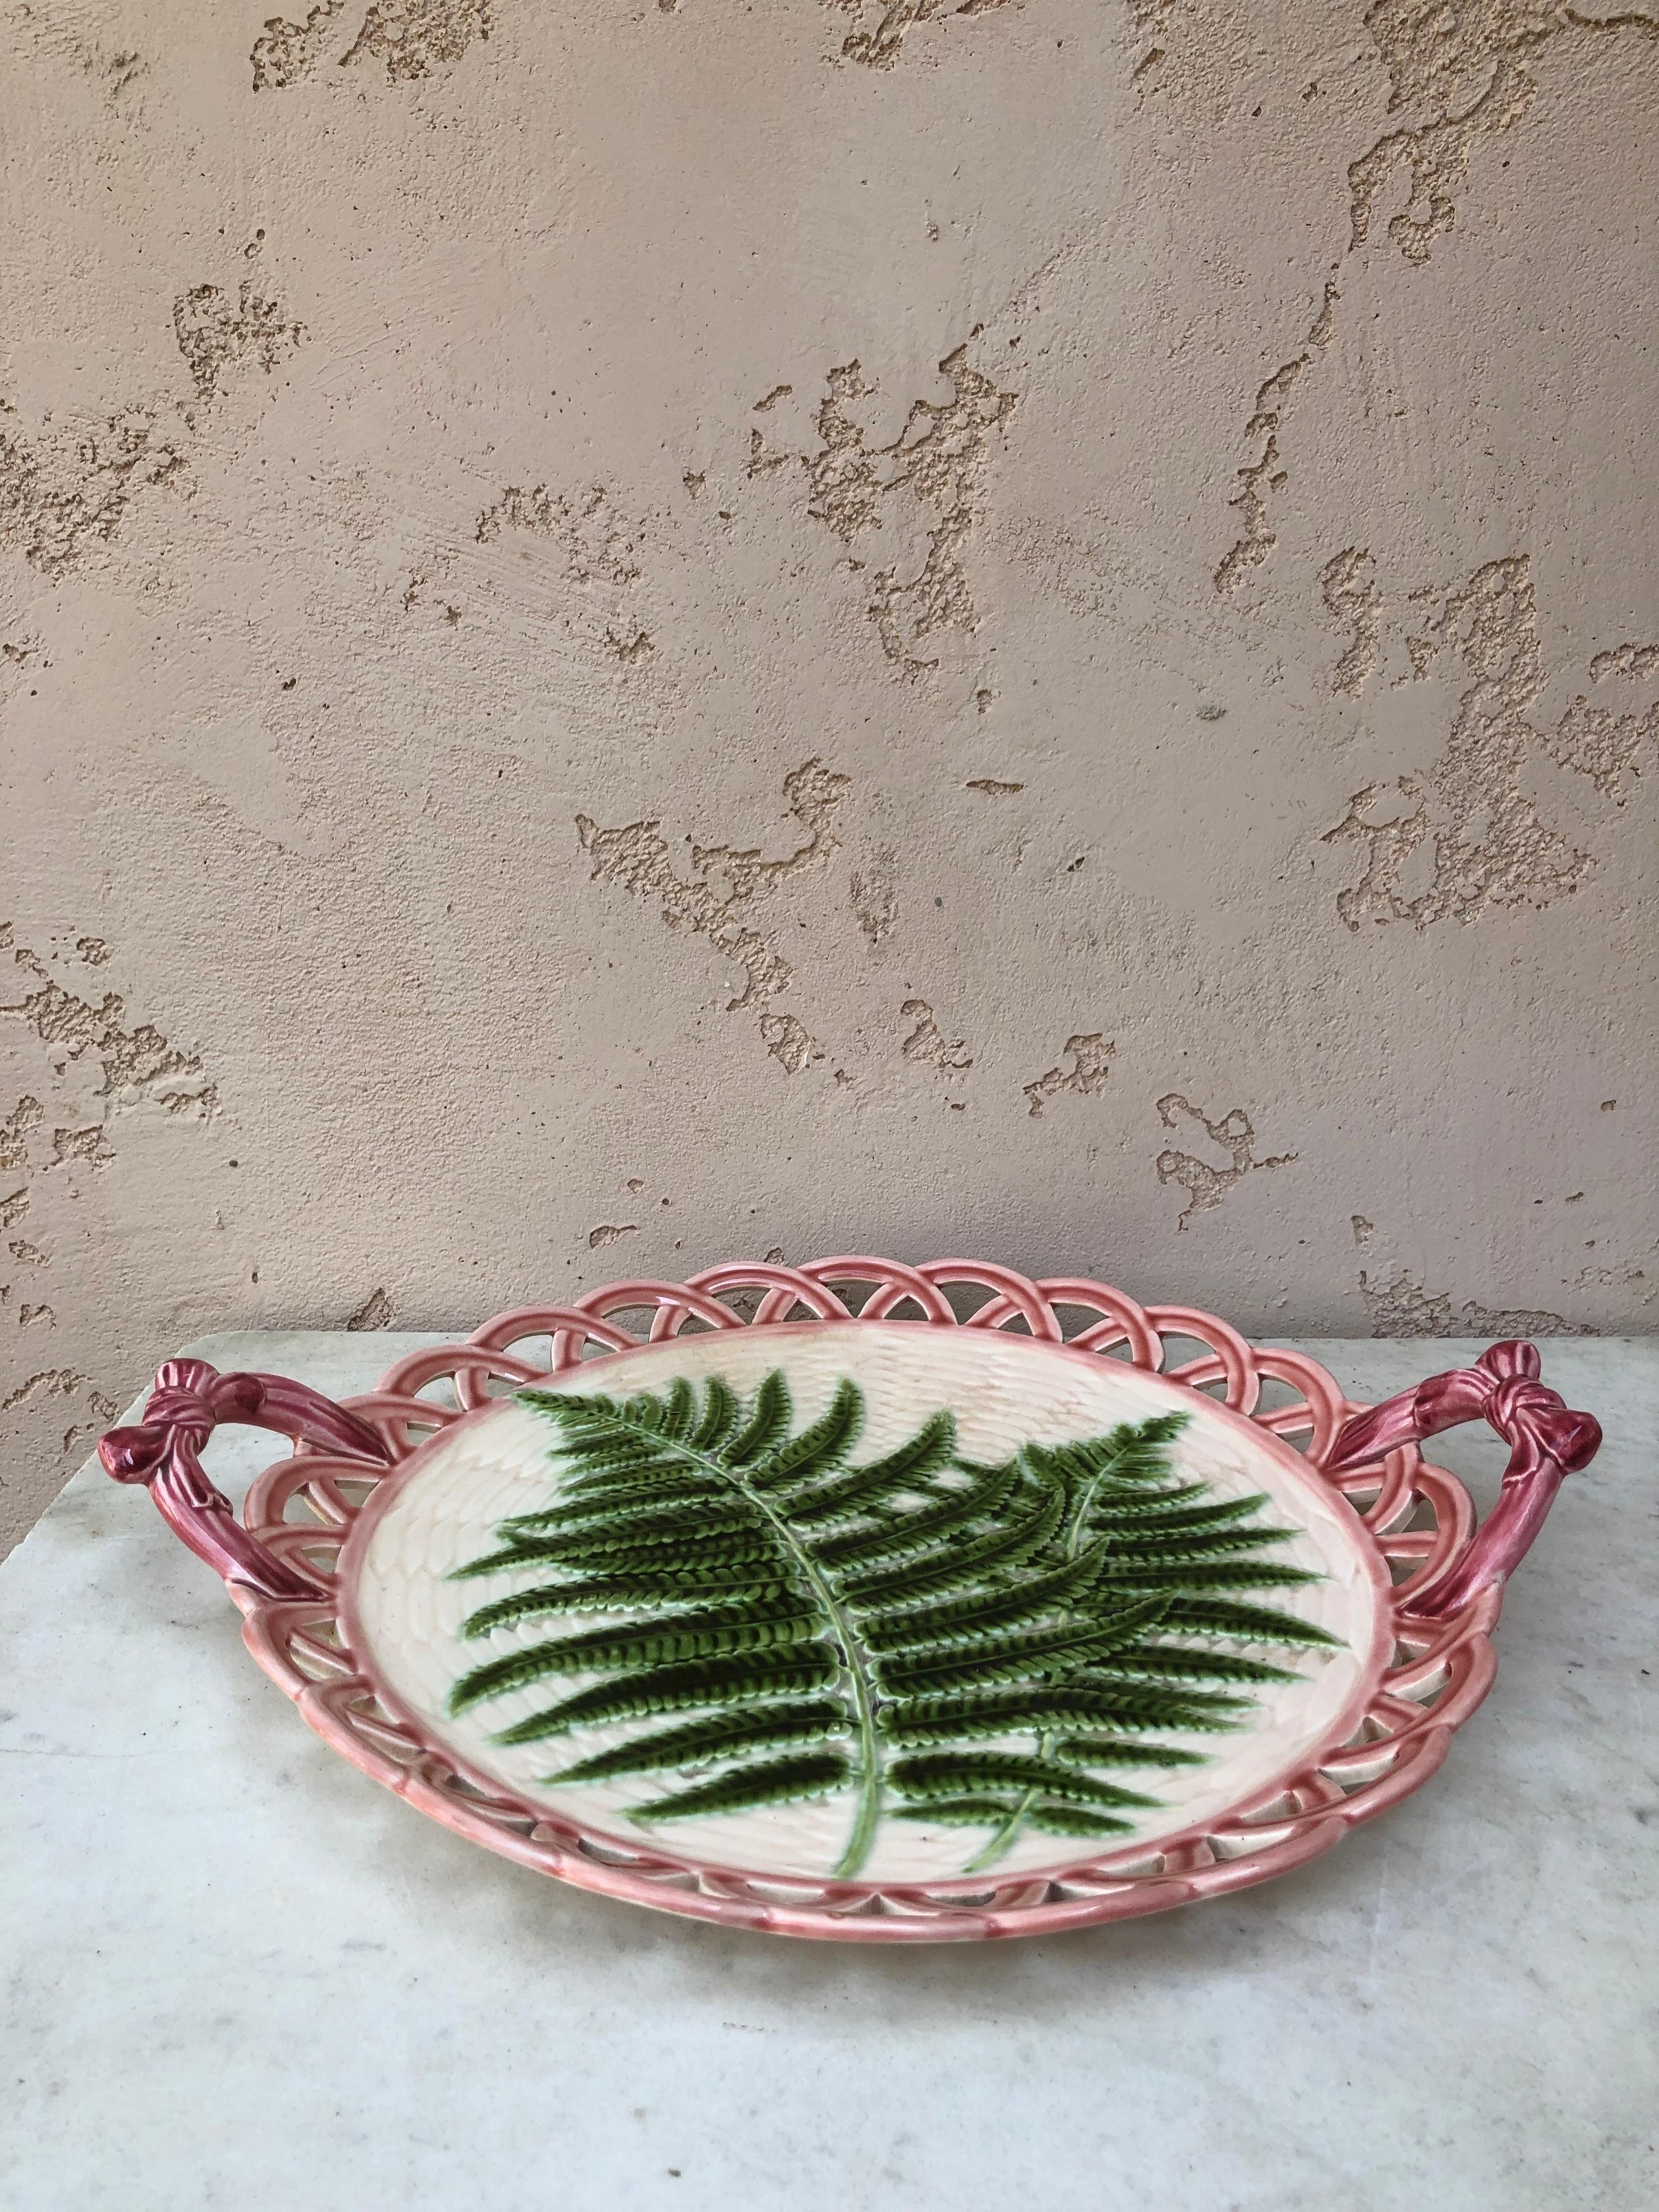 Oversize 19th century French Majolica handled reticulated platter signed Sarreguemines.
An elegant server with pink bows handles, on the center two larges ferns on a beige basketweave background.
Measures: Diameter / 16